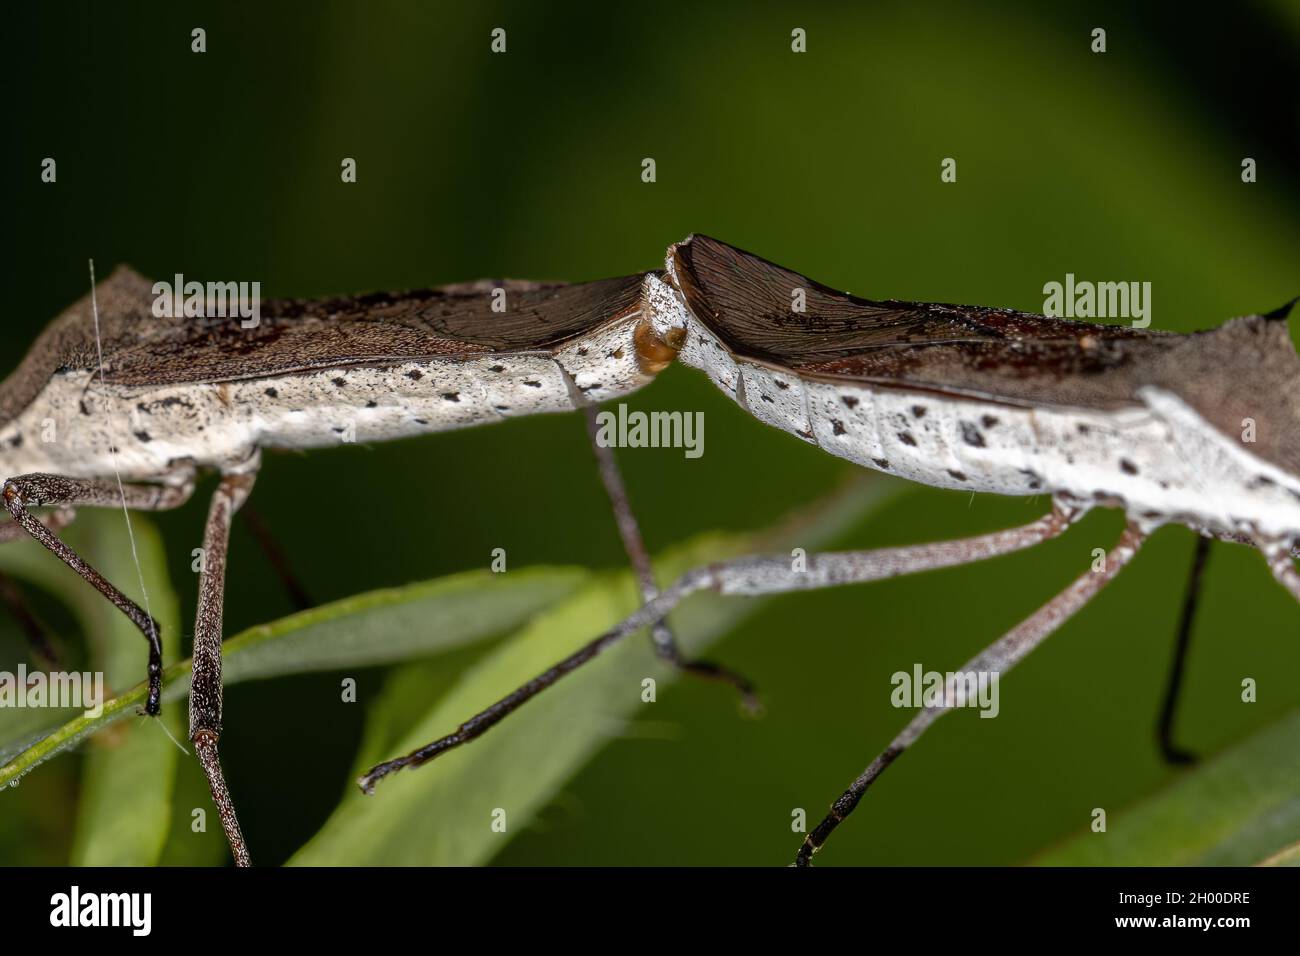 Adult Leaf-footed Bugs of the genus Chariesterus coupling Stock Photo